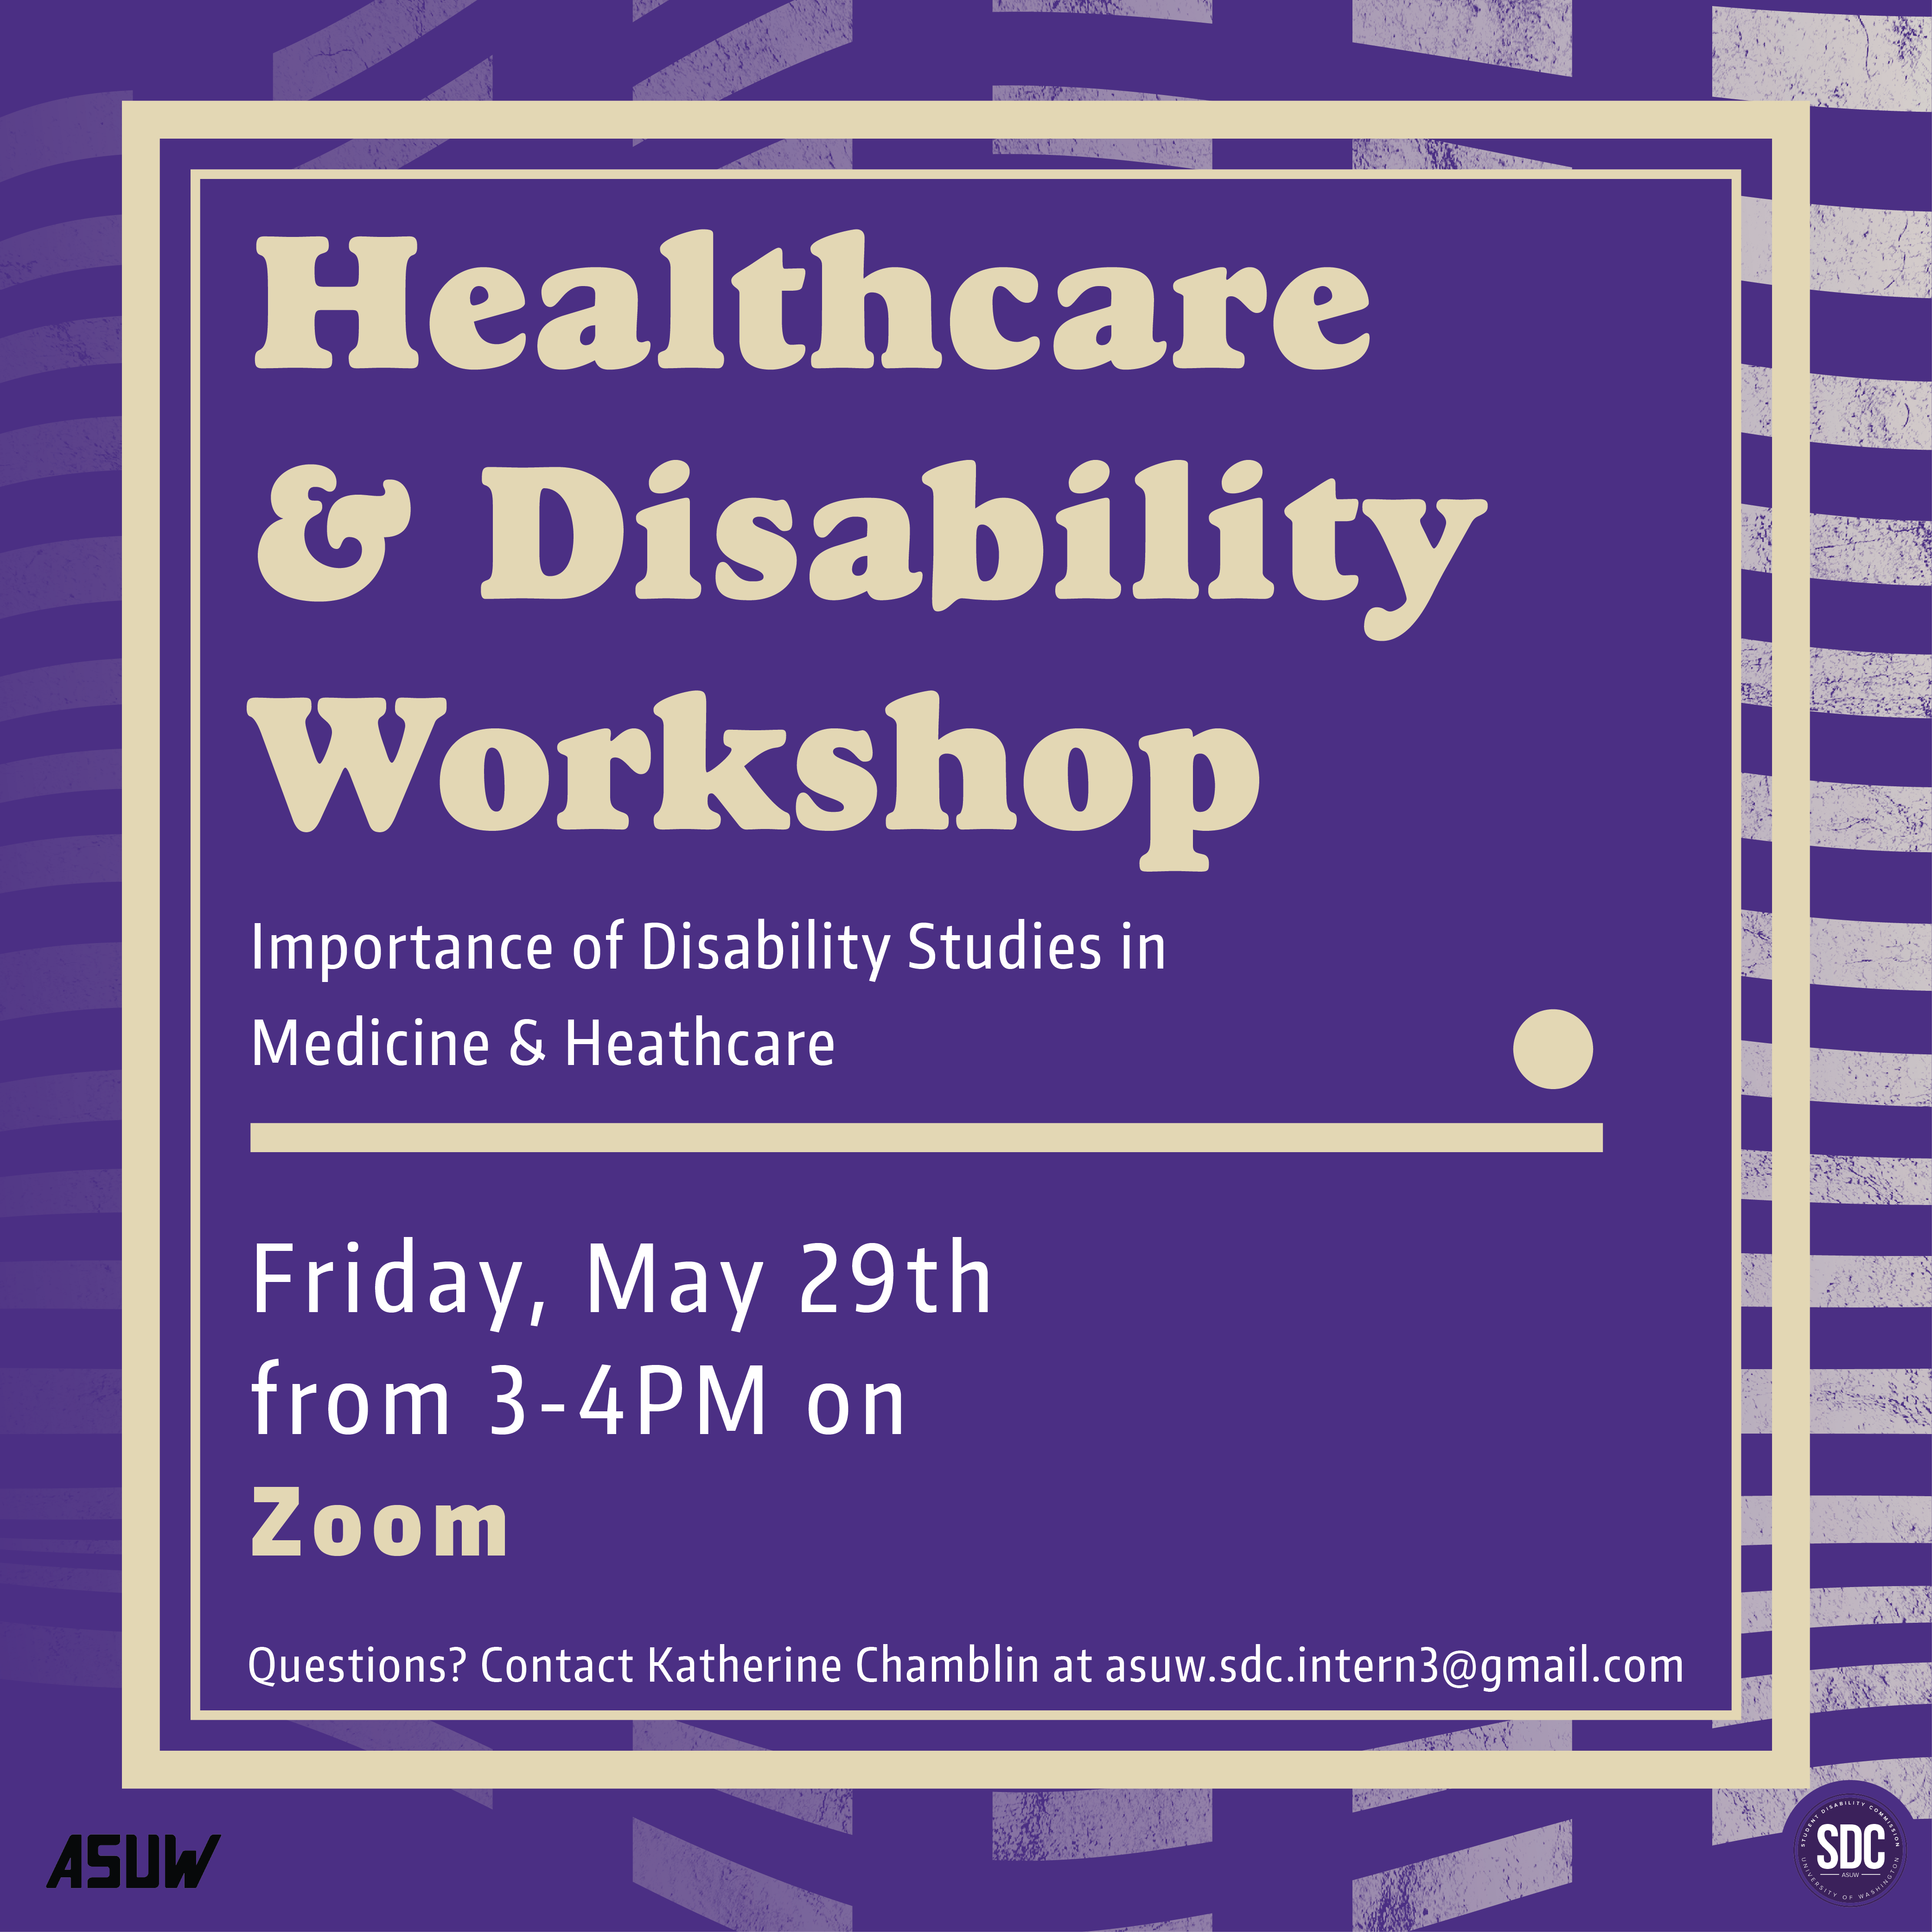 Purple background with tan text "Healthcare & Disability Workshop: Importance of Disability studies in Medicine and Healthcare. Friday, May 29th from 3-4 pm on Zoom. Questions? Email Katherine Chamblin at asuw.sdc.intern3@gmail.com"